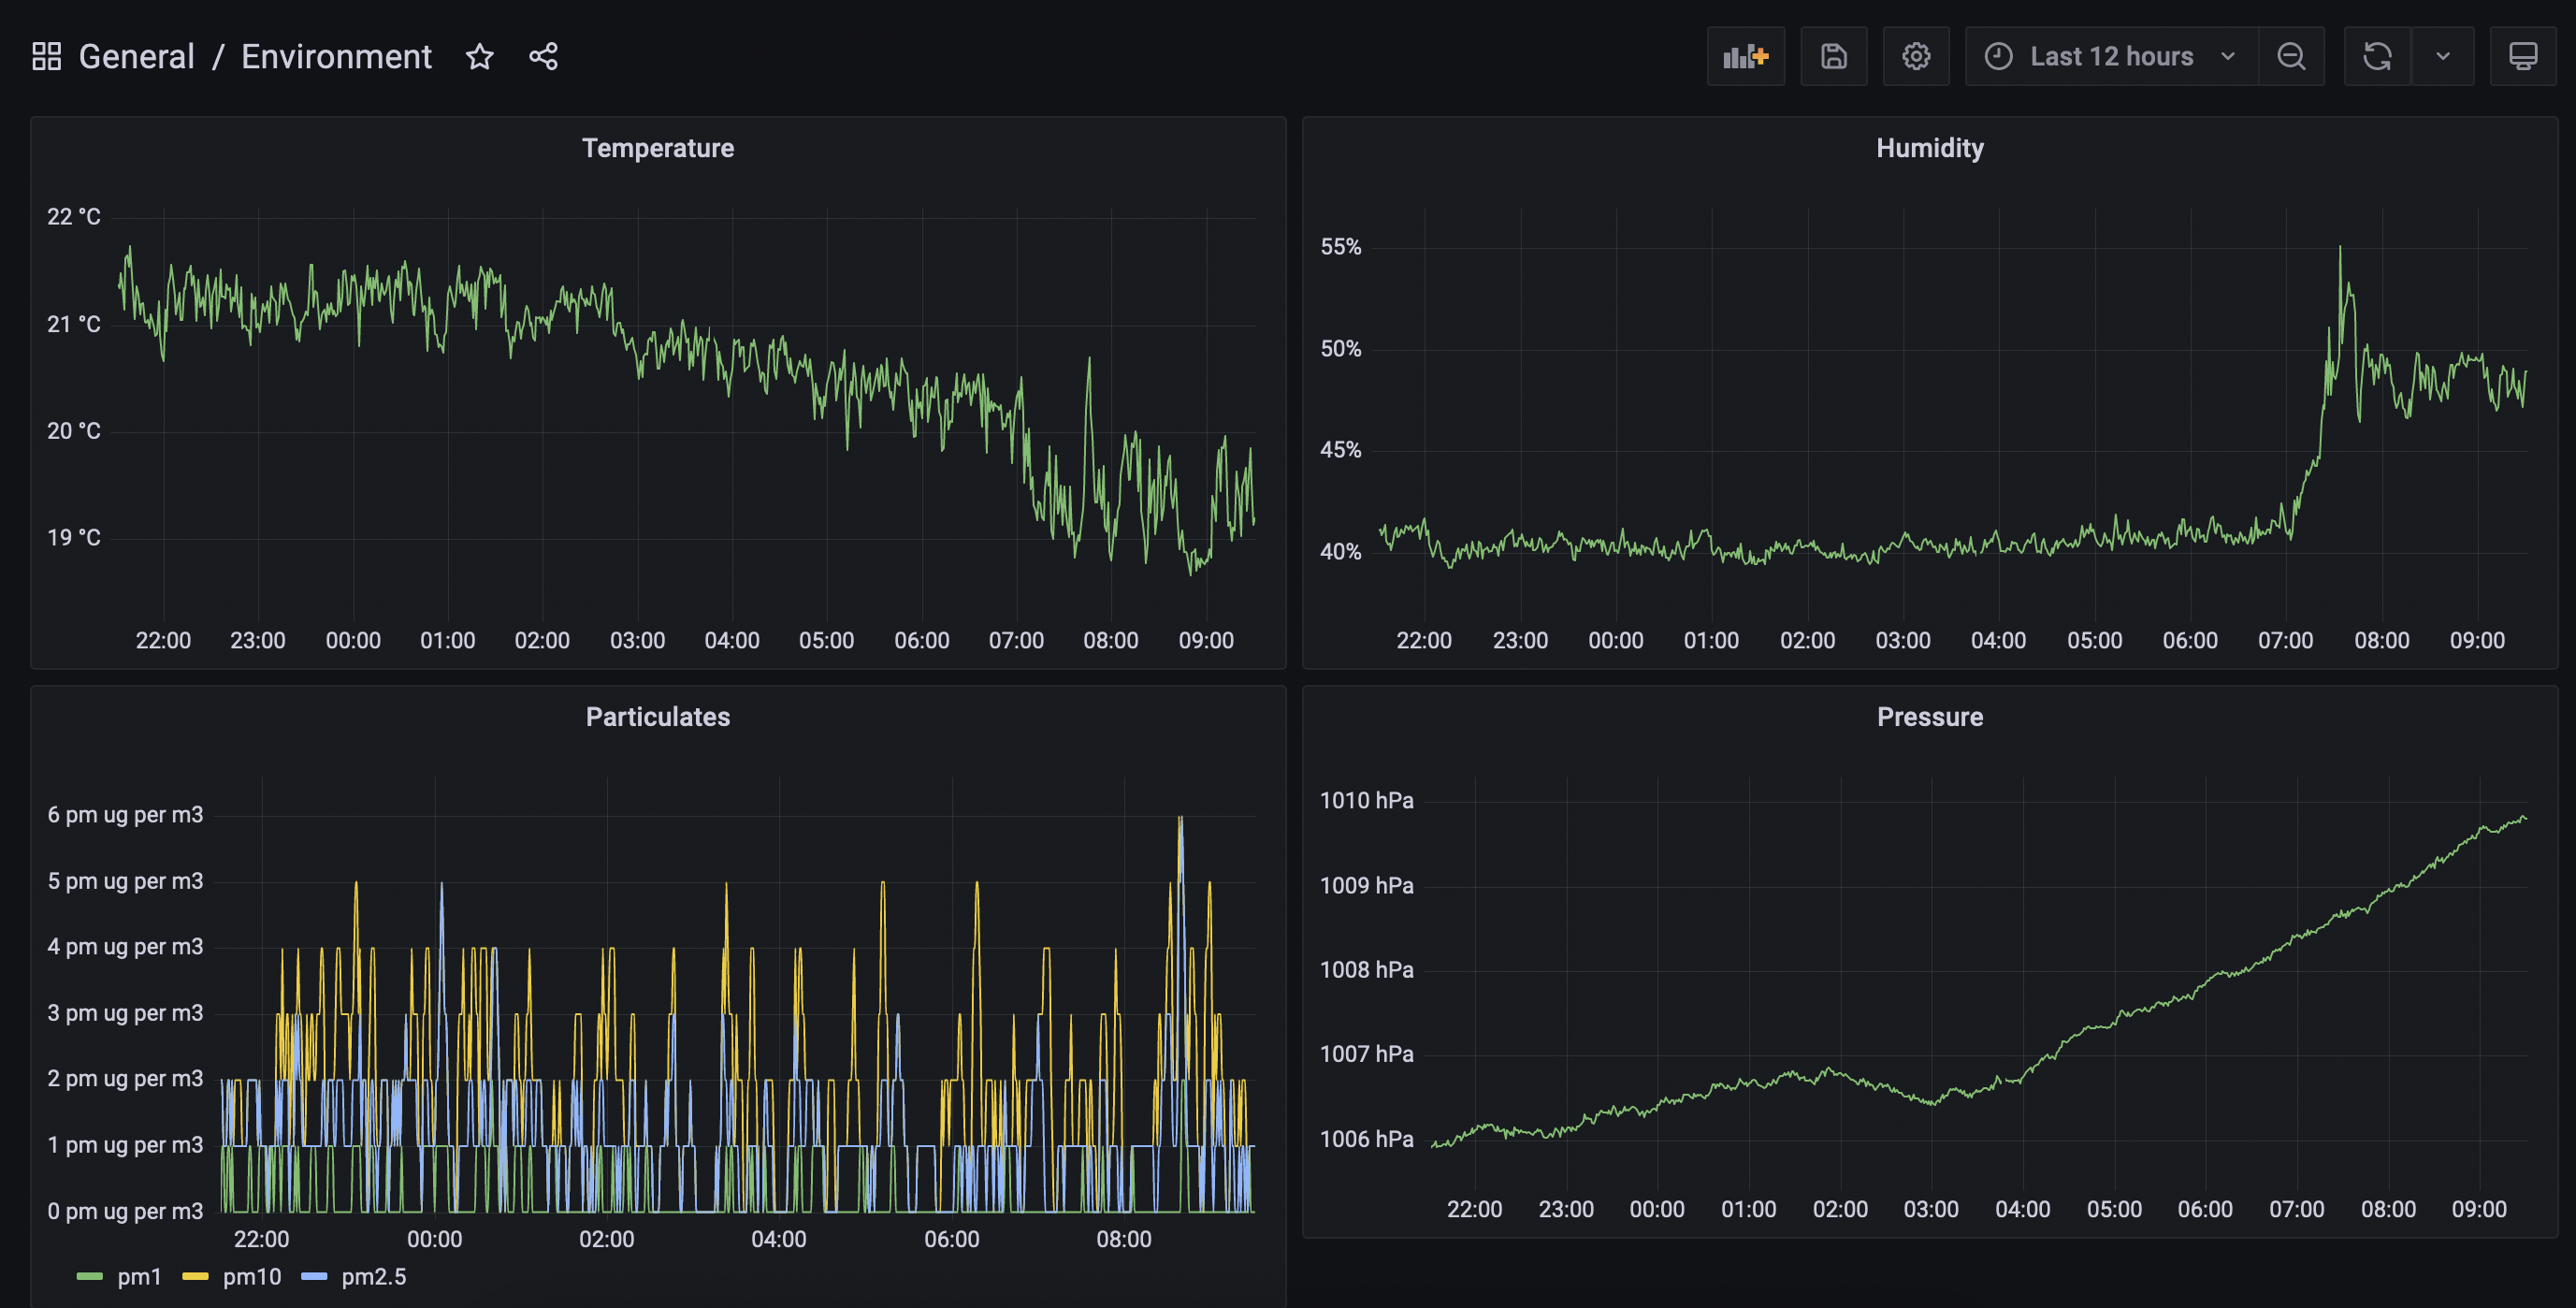 The completed environment Grafana dashboard